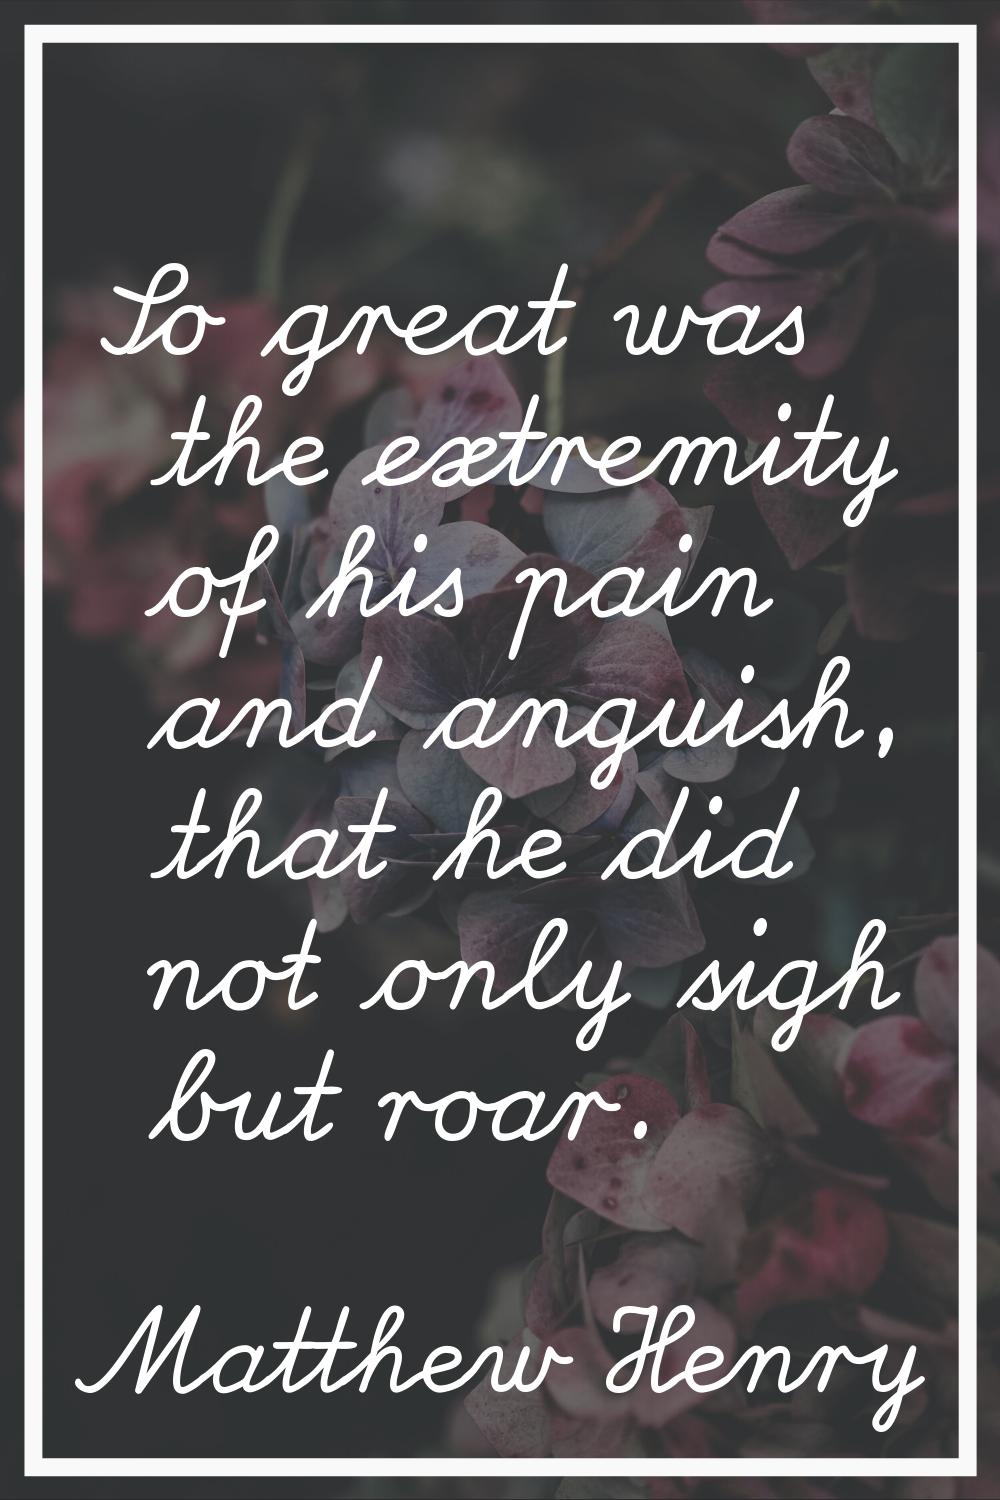 So great was the extremity of his pain and anguish, that he did not only sigh but roar.